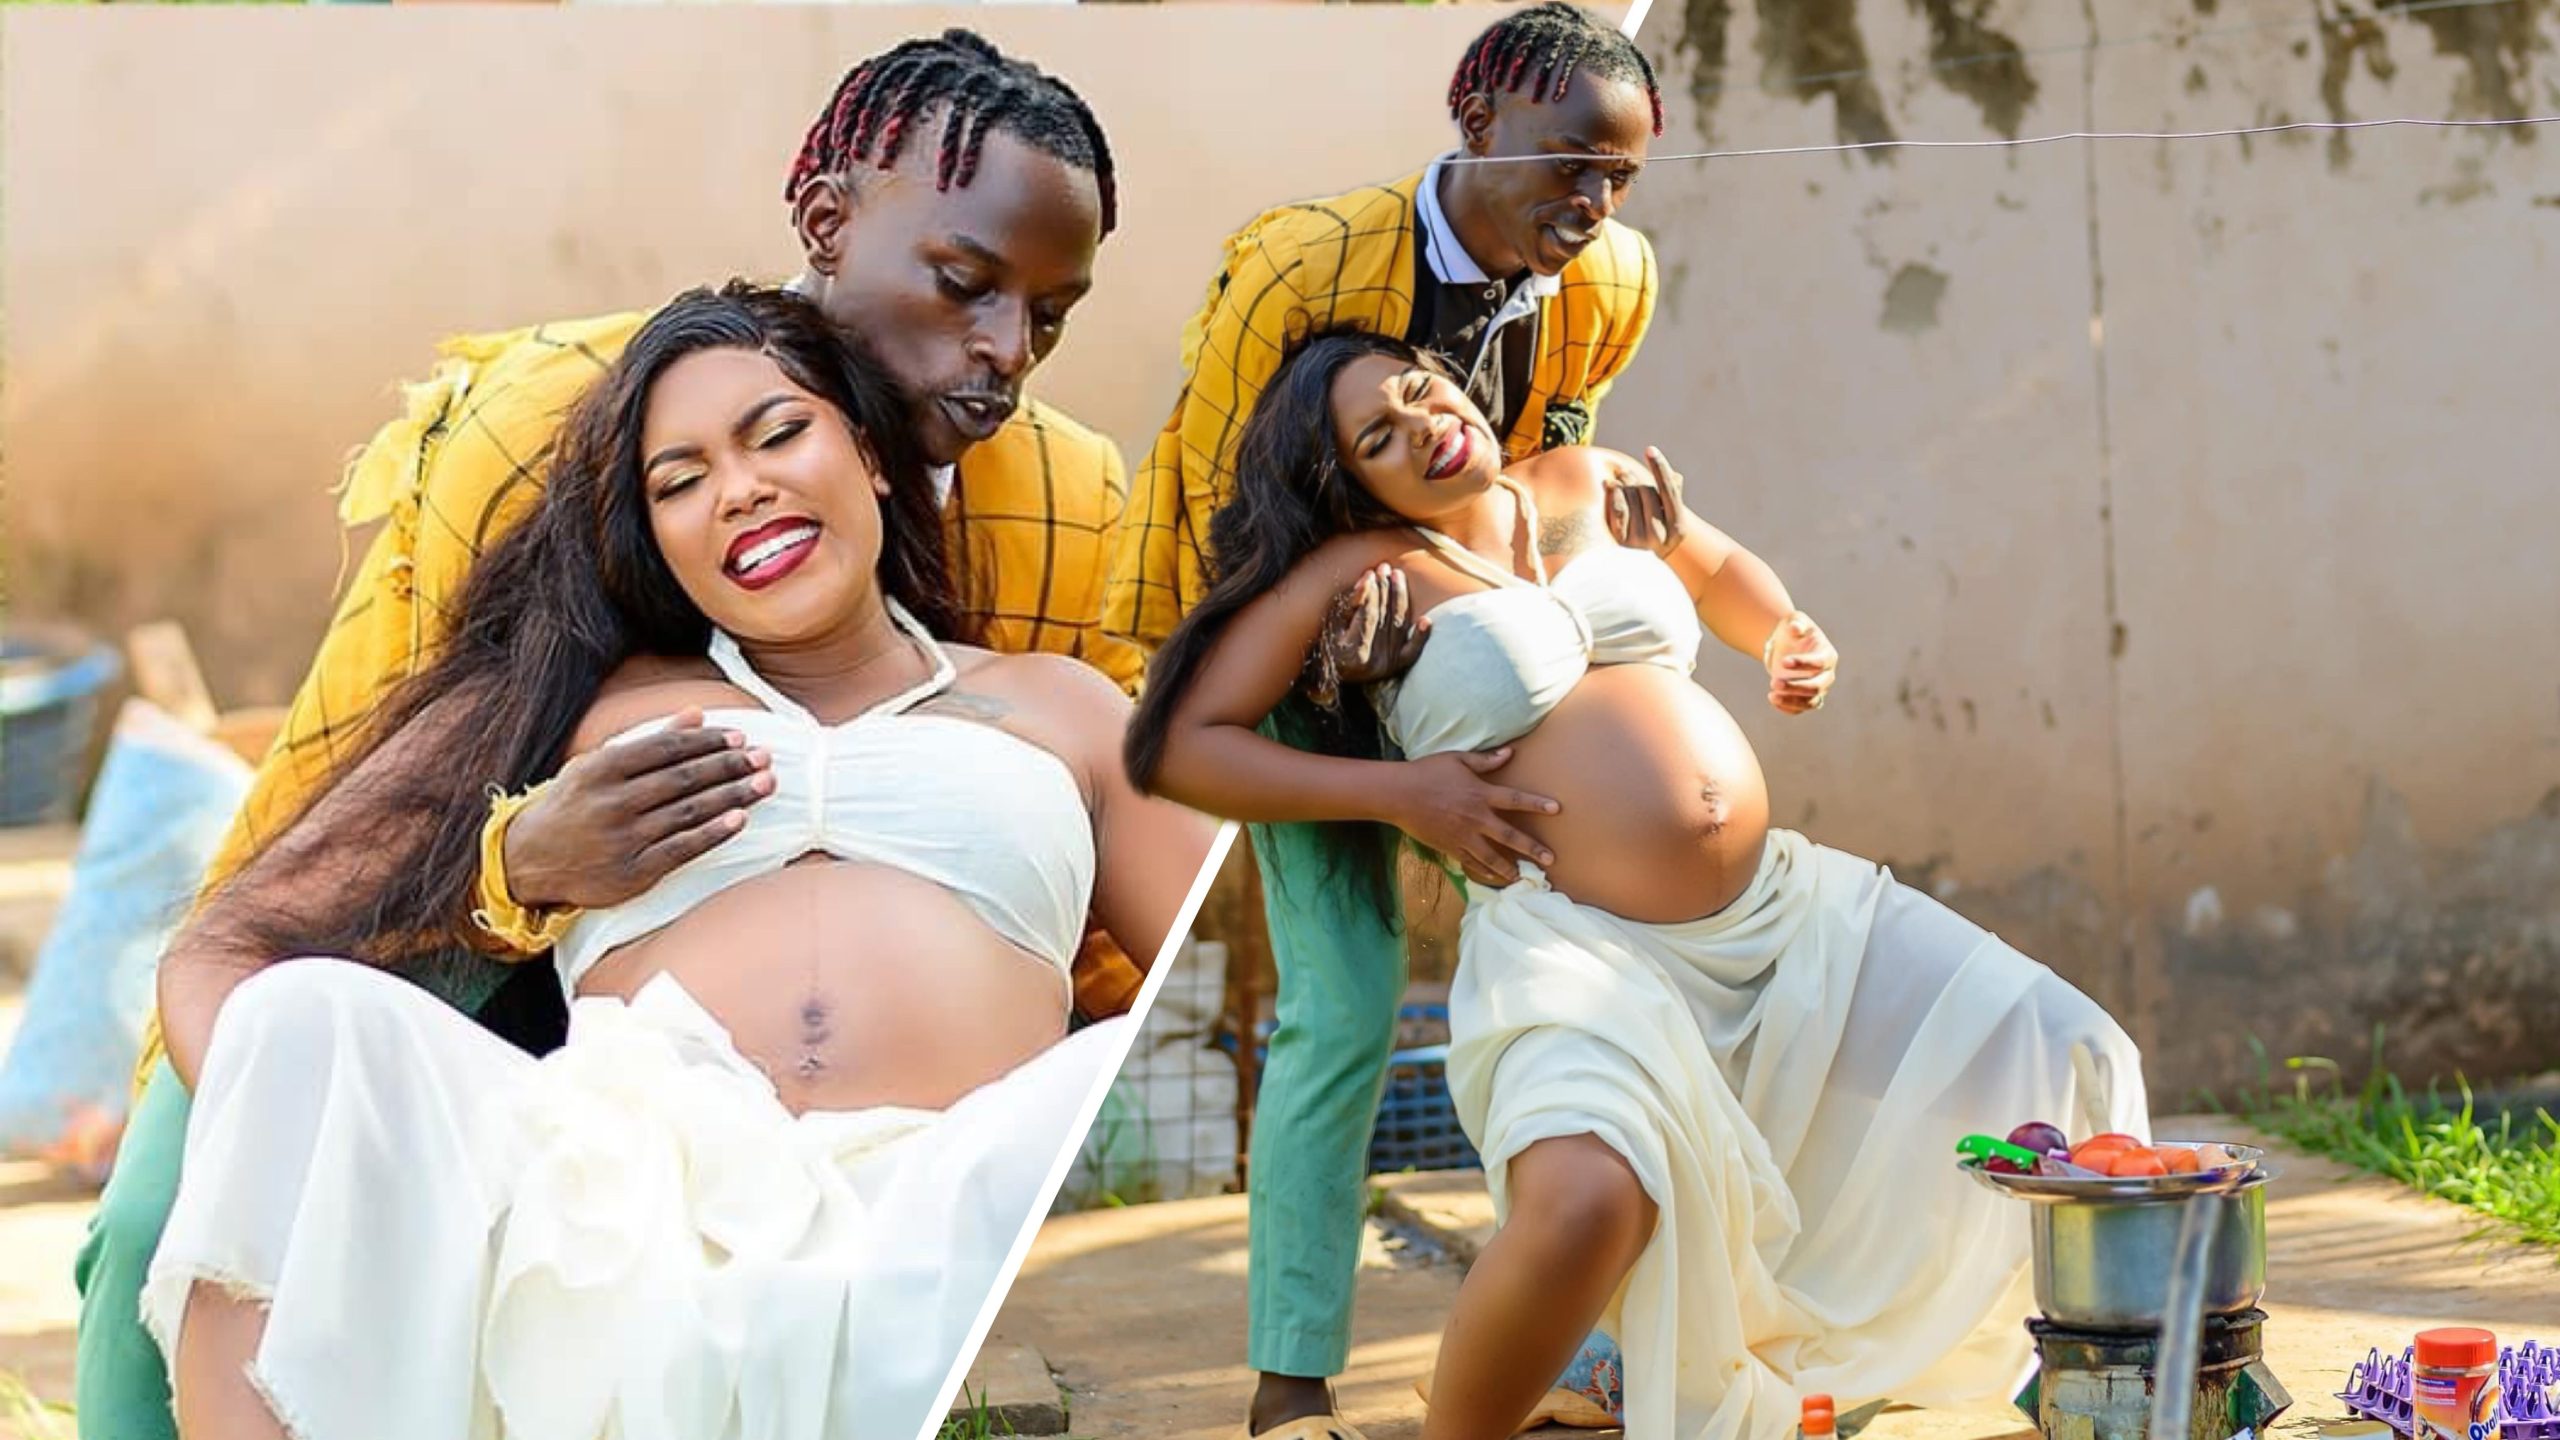 Mikey Seems 2 Funny, Bash dazzle in hilarious maternity photoshoot (PHOTOS)